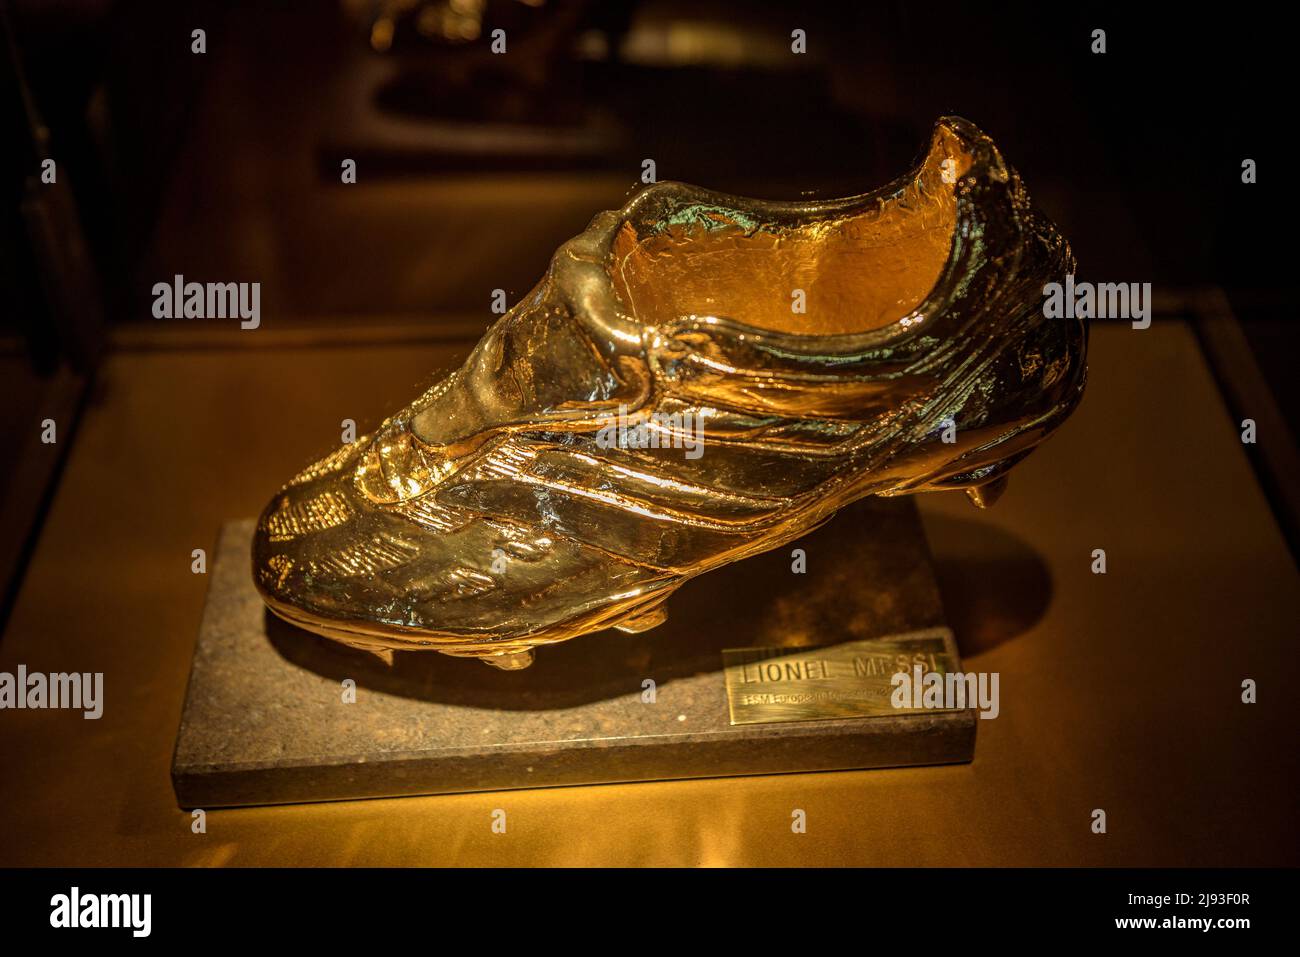 European Golden Shoe to the top European scorer awarded to Leo Messi, in the Messi space of the FC Barcelona museum, at the Camp Nou, Barcelona, Spain Stock Photo